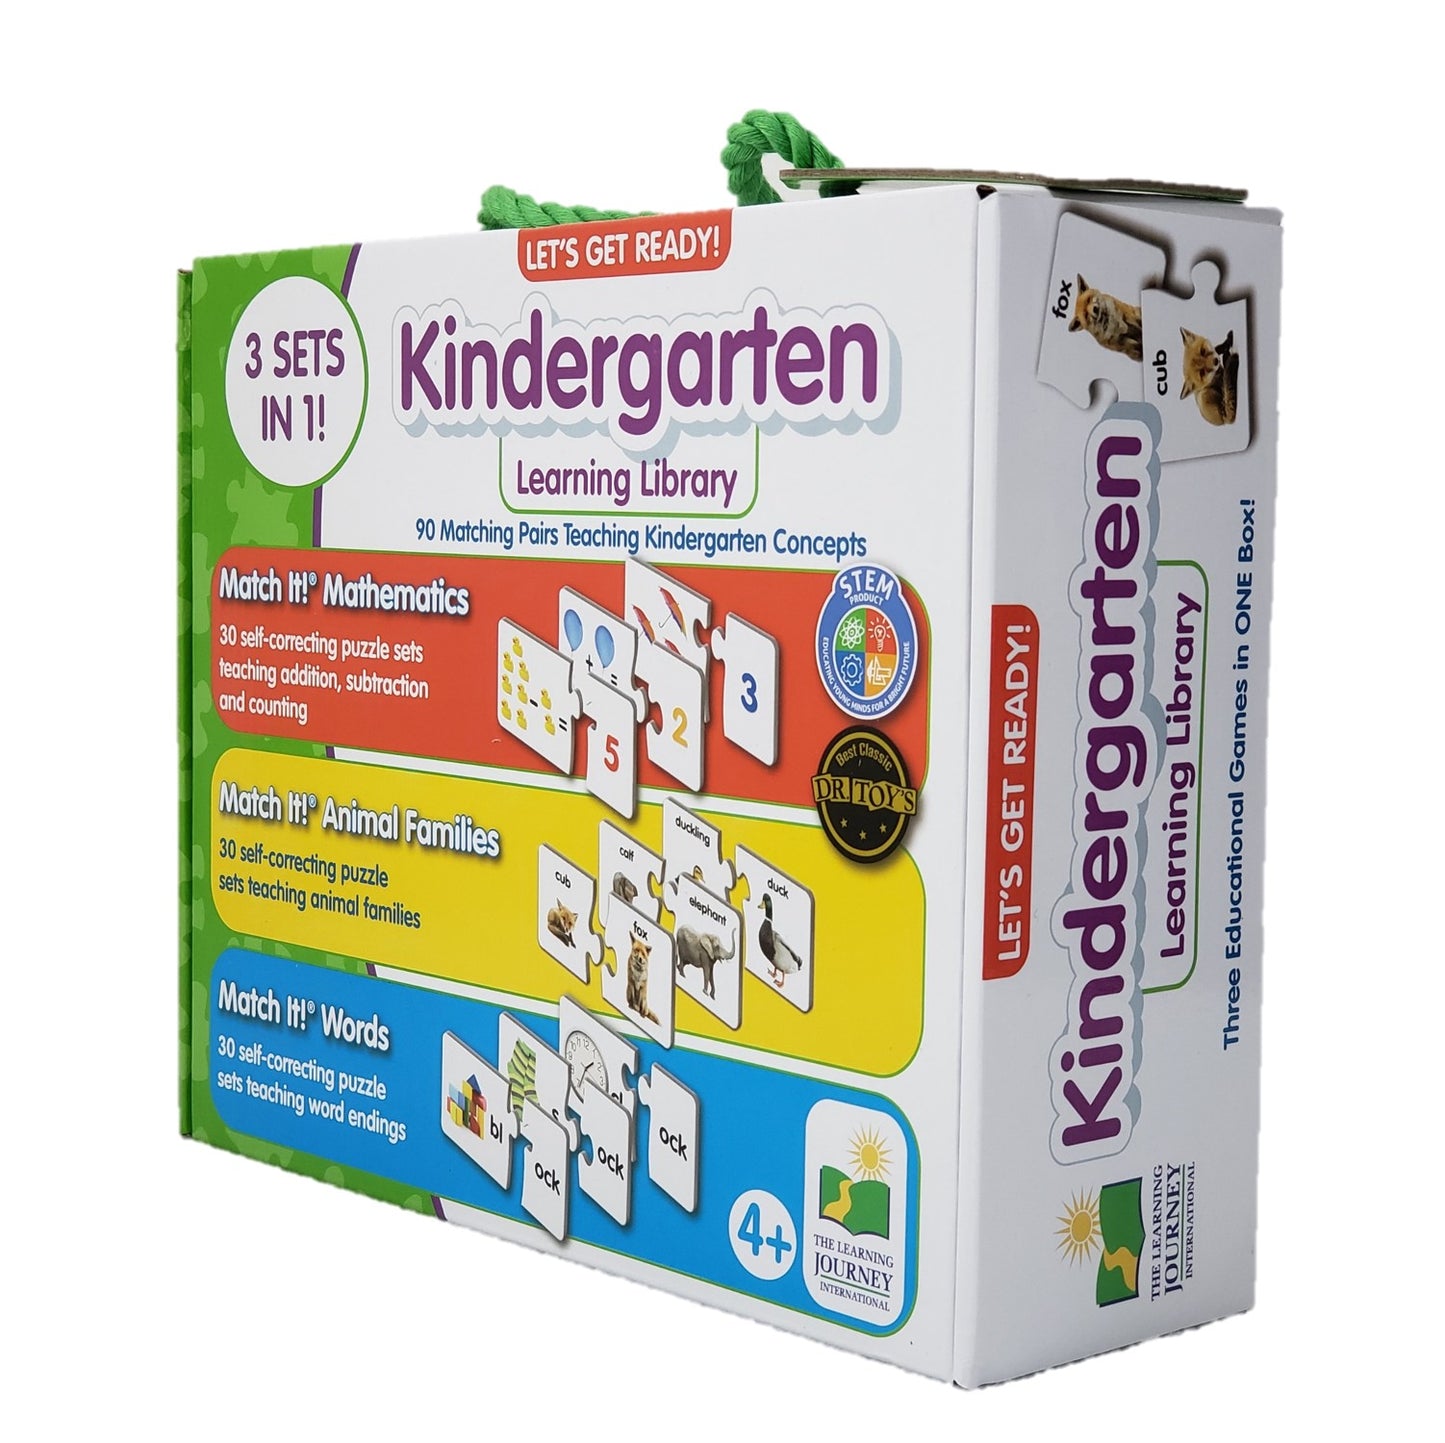 Learning Library Kindergarten Mathematics, Animal Families, Words - 3 Sets in 1